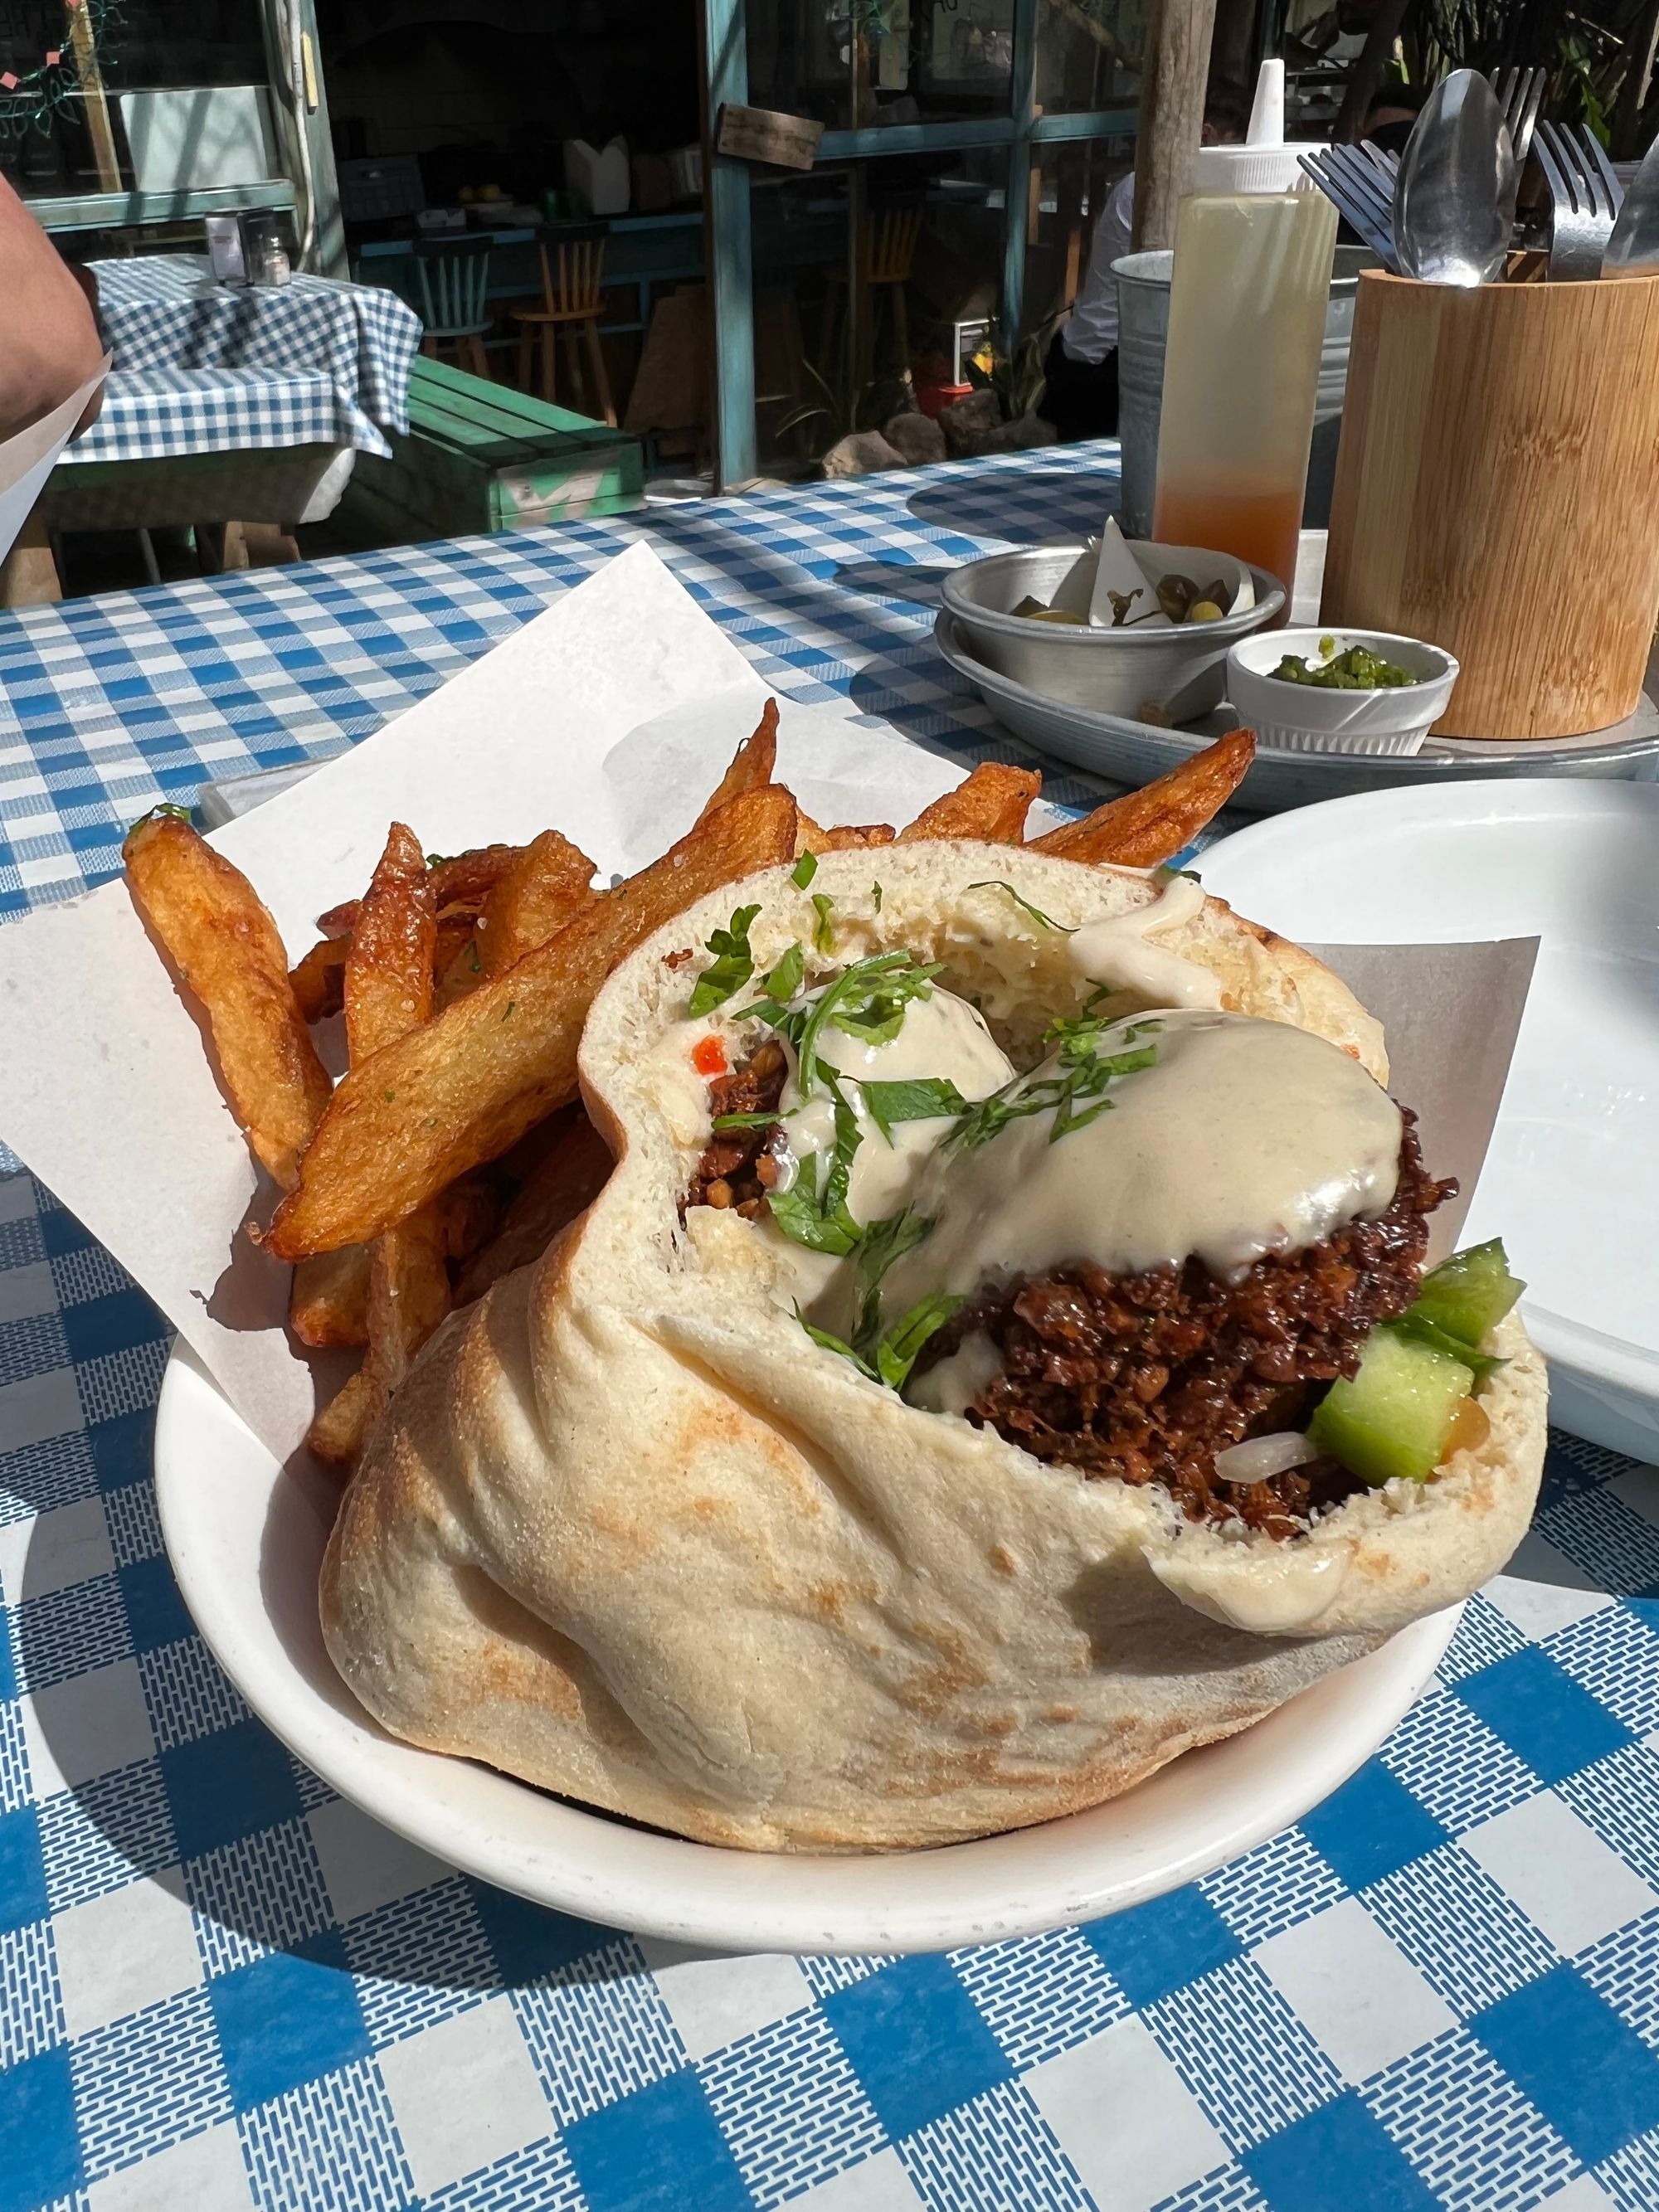 The best Vegan-friendly places in Israel (part 1)